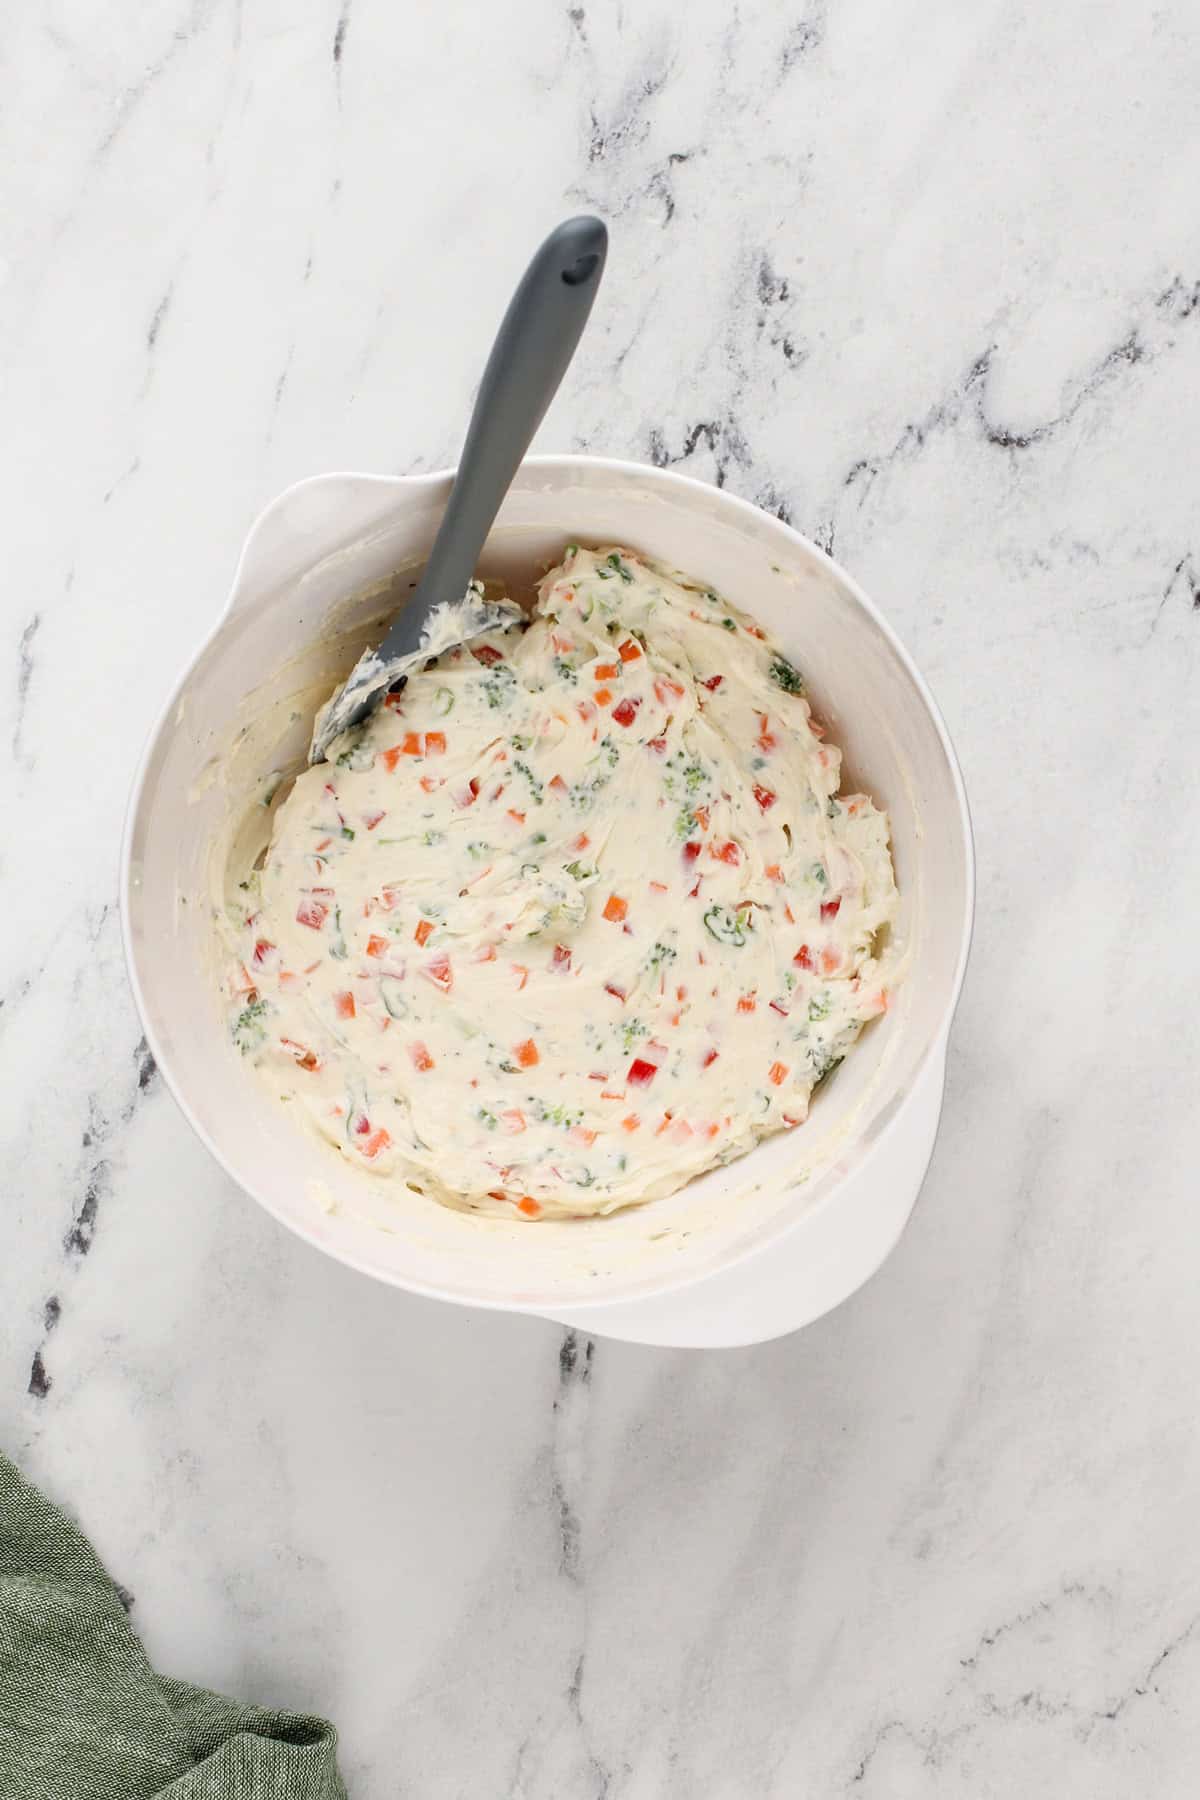 Veggie cream cheese mixed in a white mixing bowl.